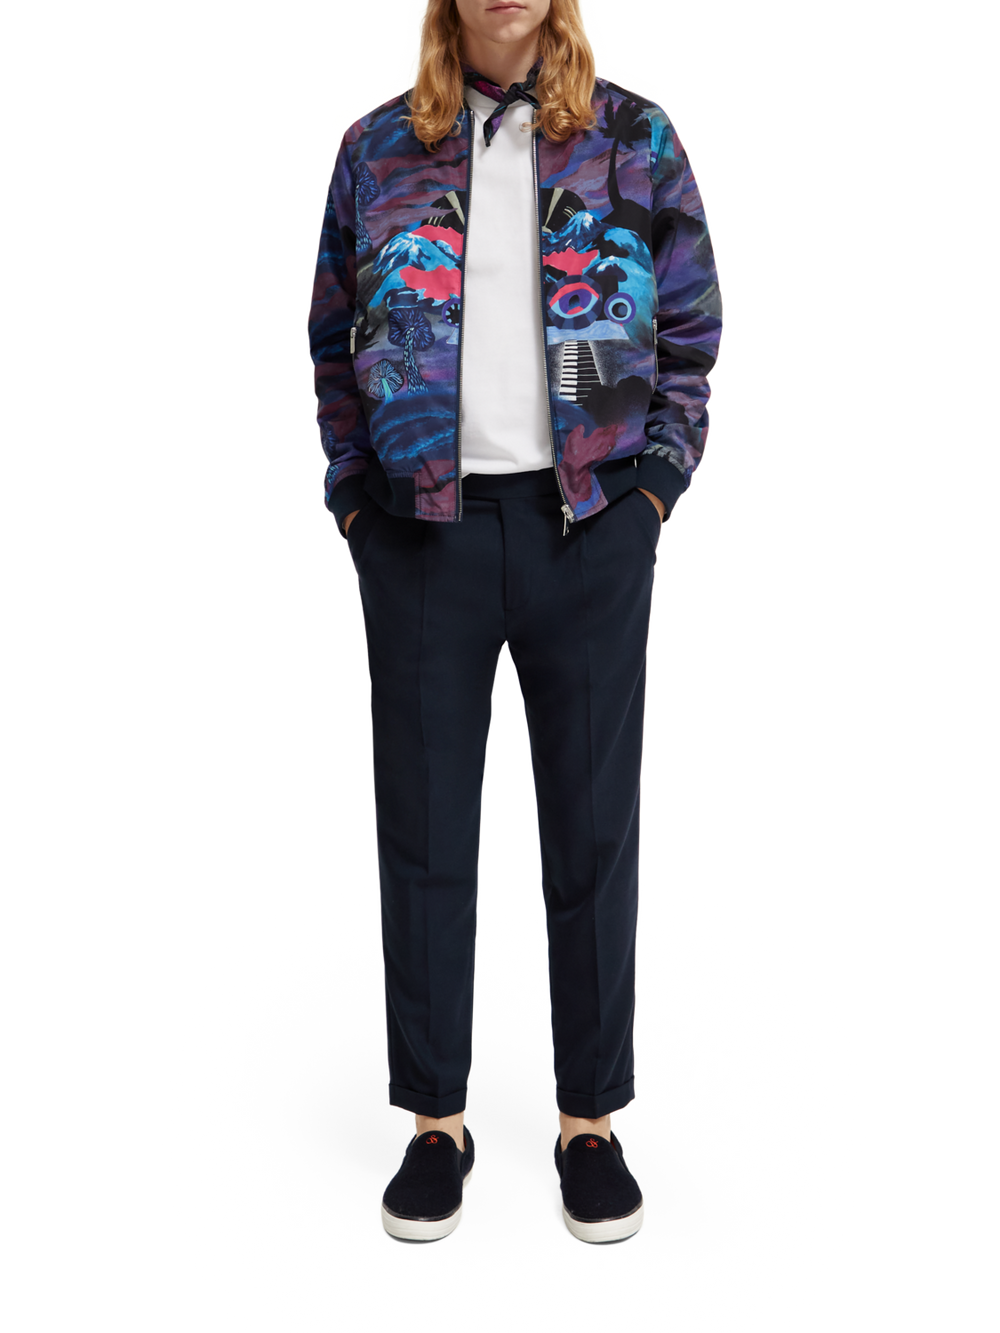 Reversible Bomber Jacket in Moody Festival | Buster McGee